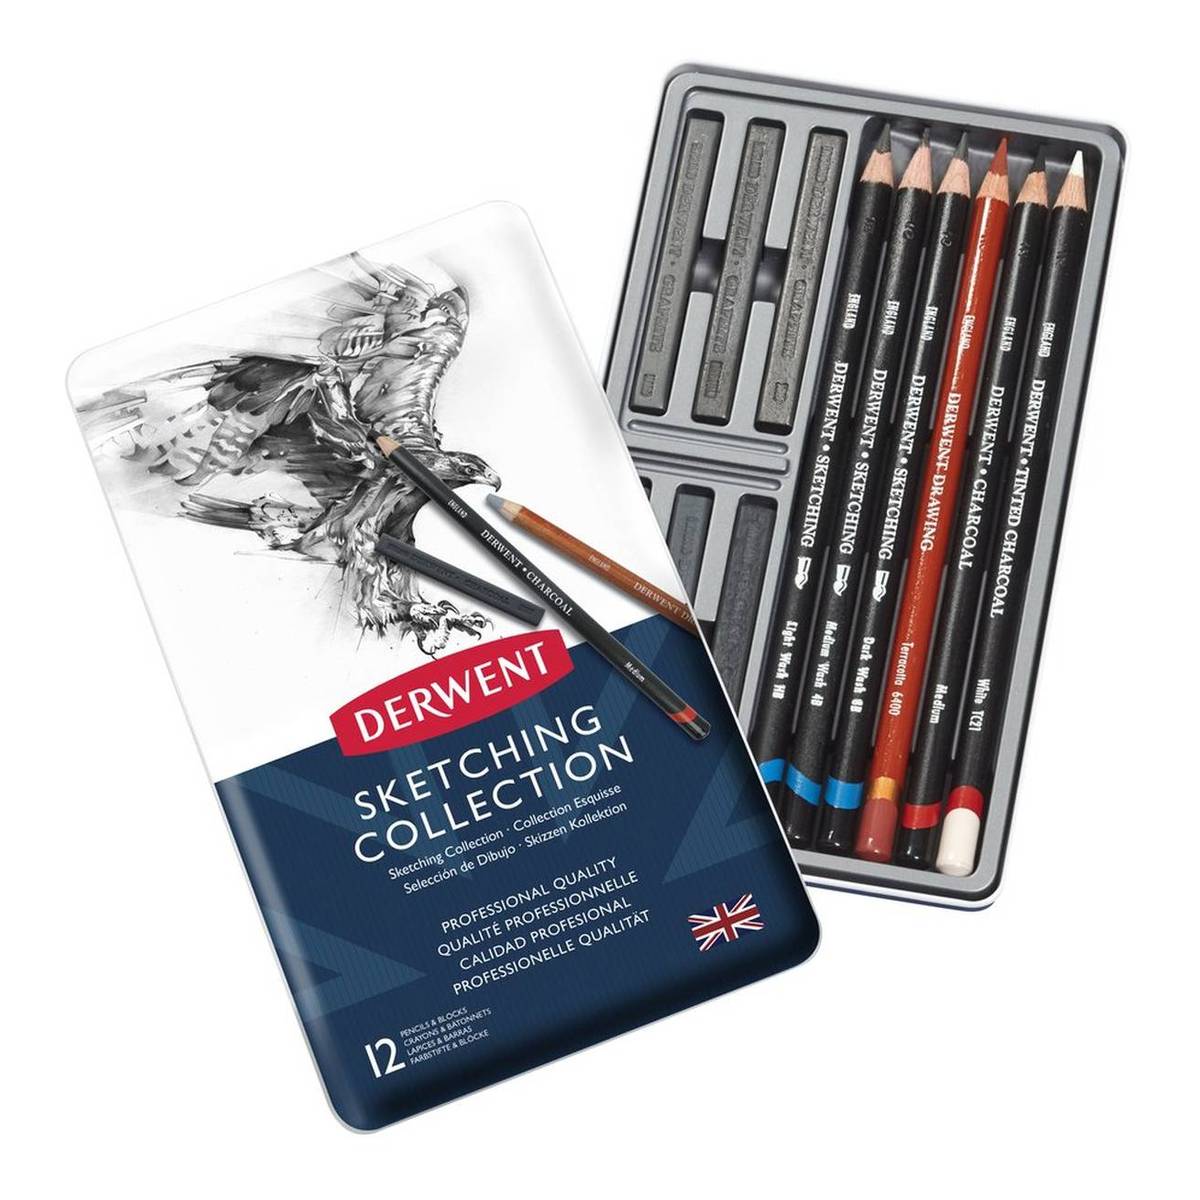 Derwent Sketching Collection Set of 12 | Pen Store